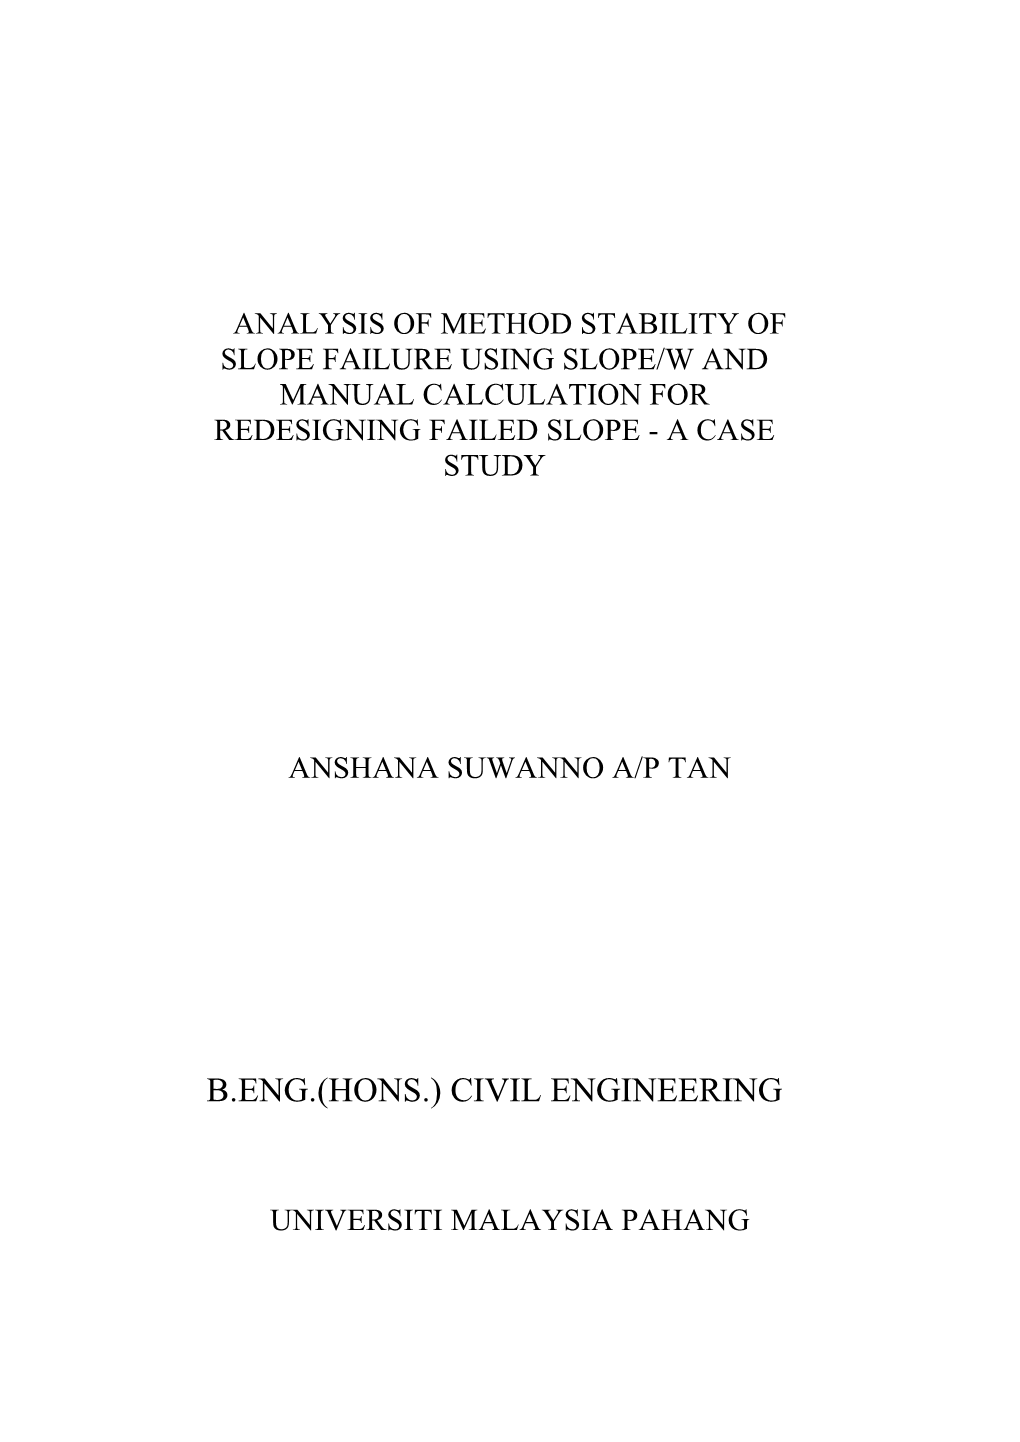 UMP Thesis Template